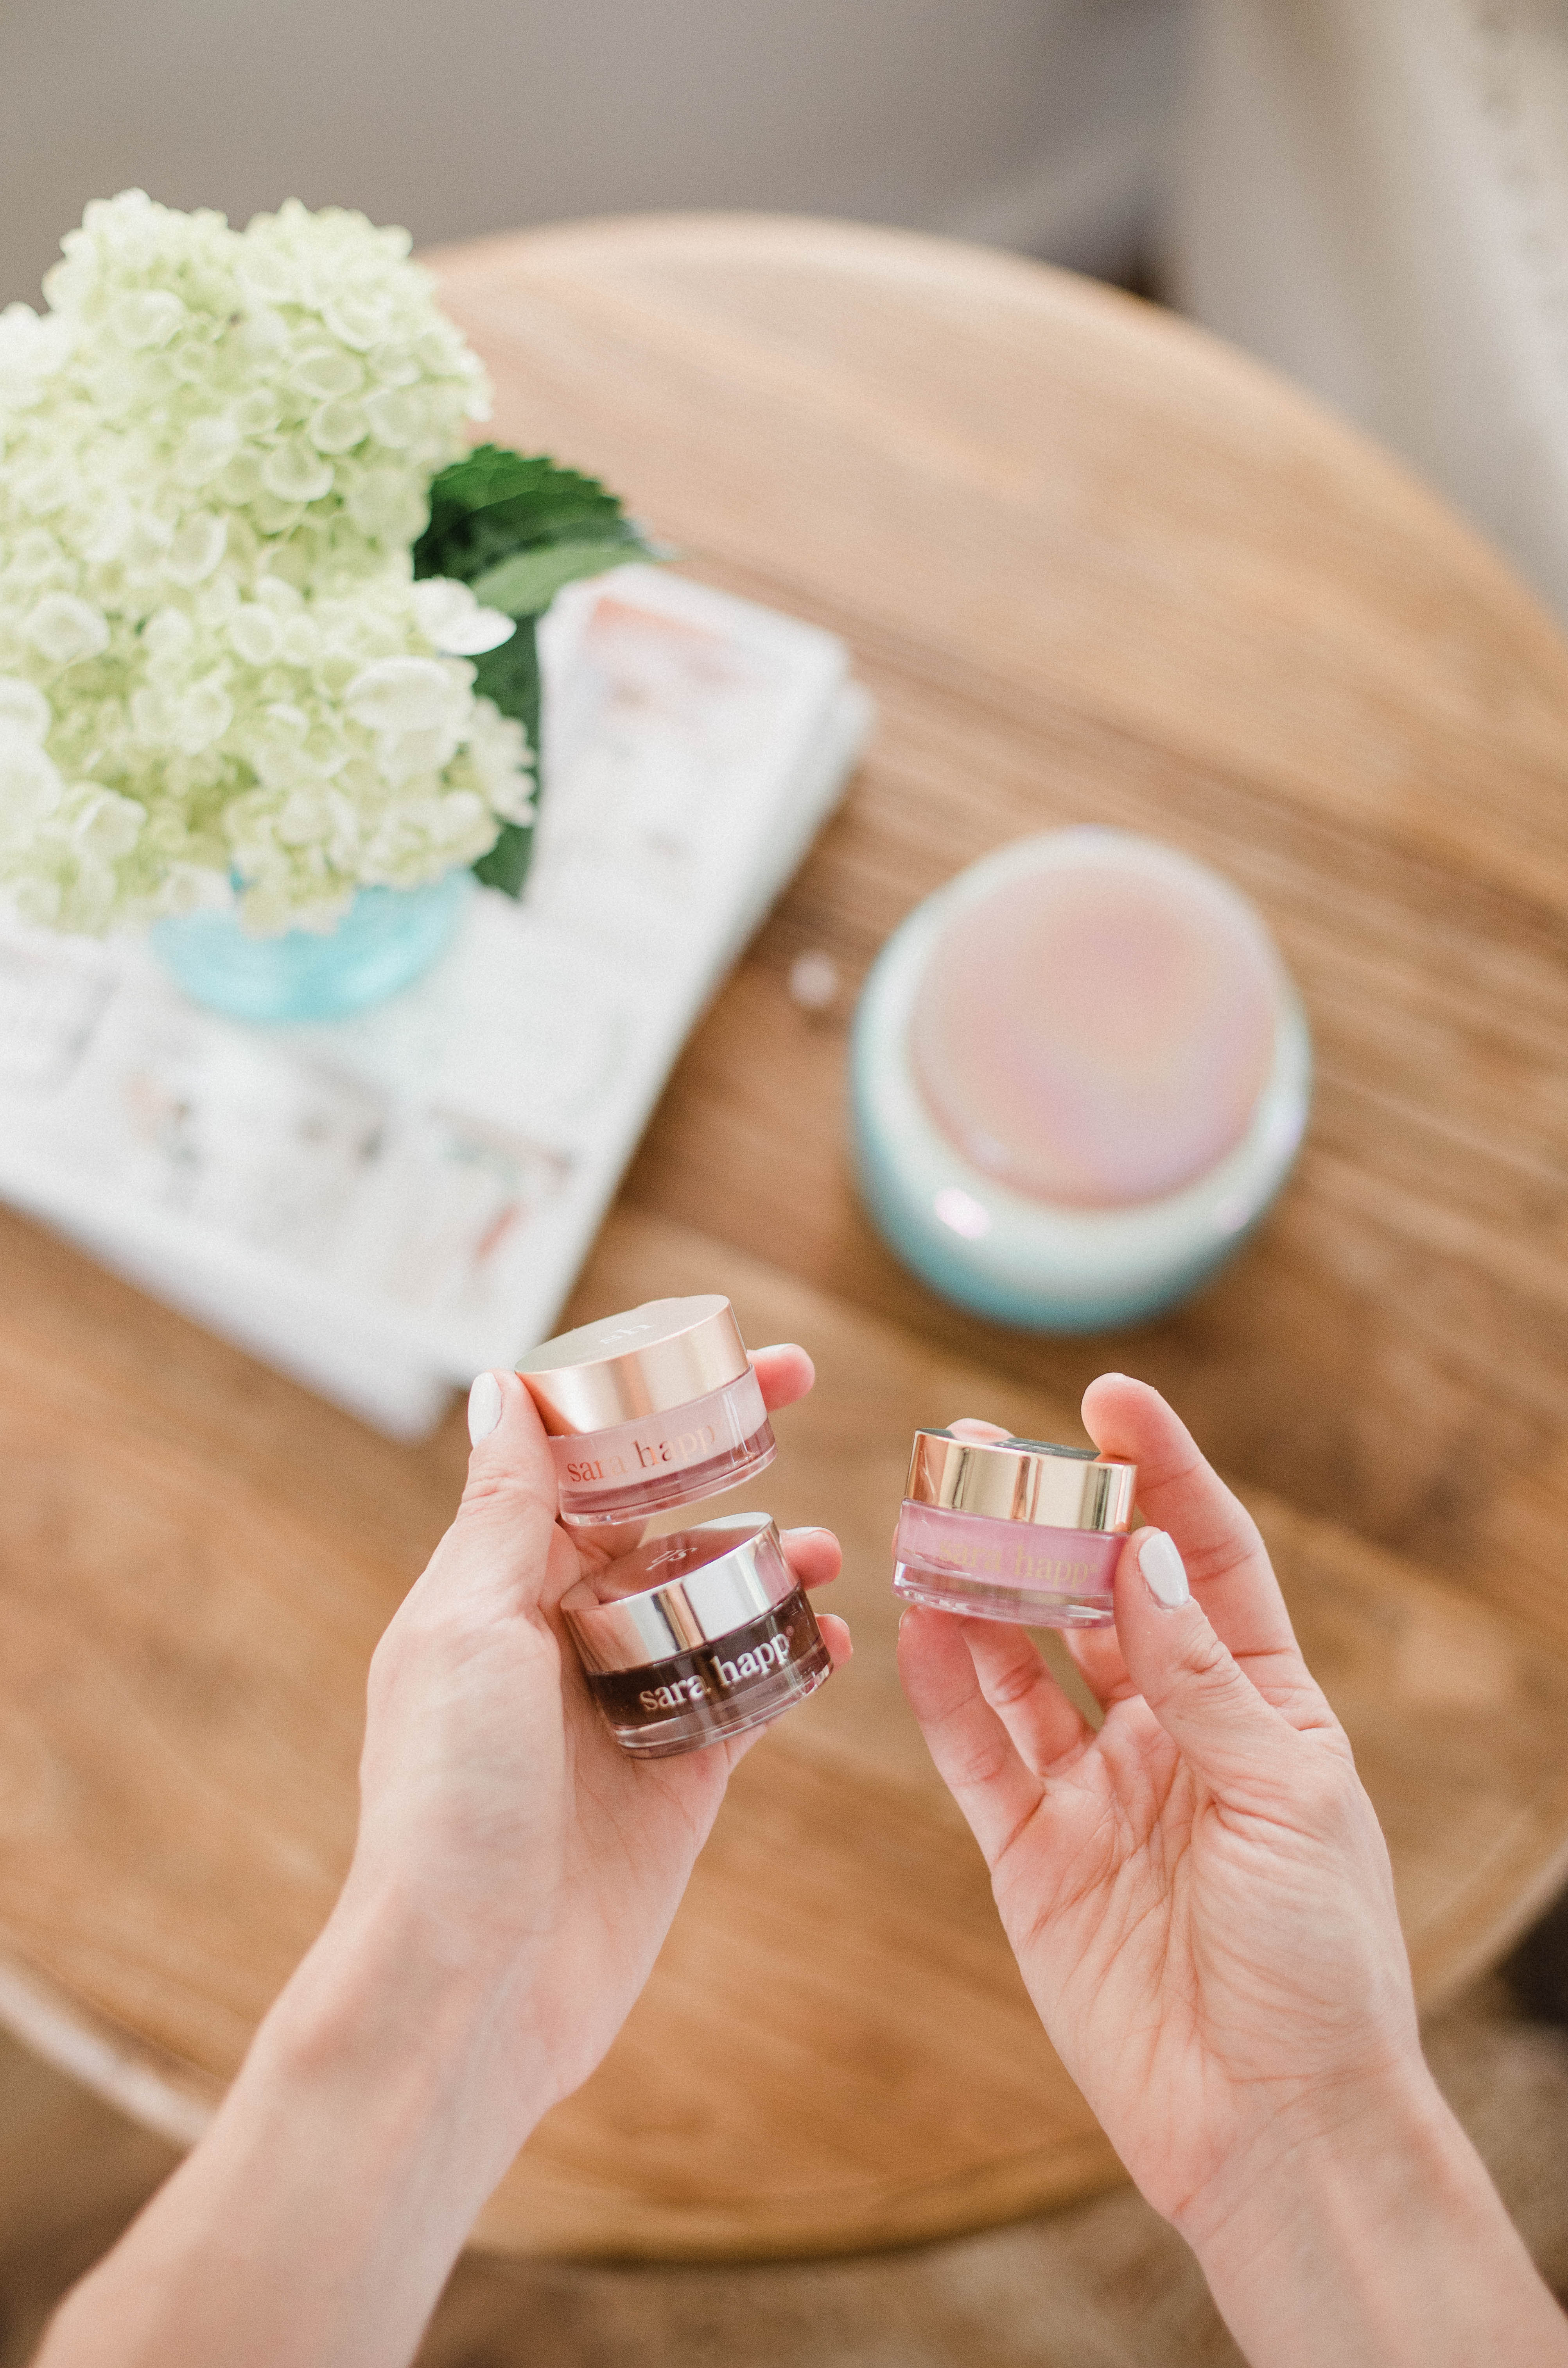 Connecticut life and style blogger Lauren McBride shares 5 items from QVC that will make you feel nice if you're in need of some pampering.